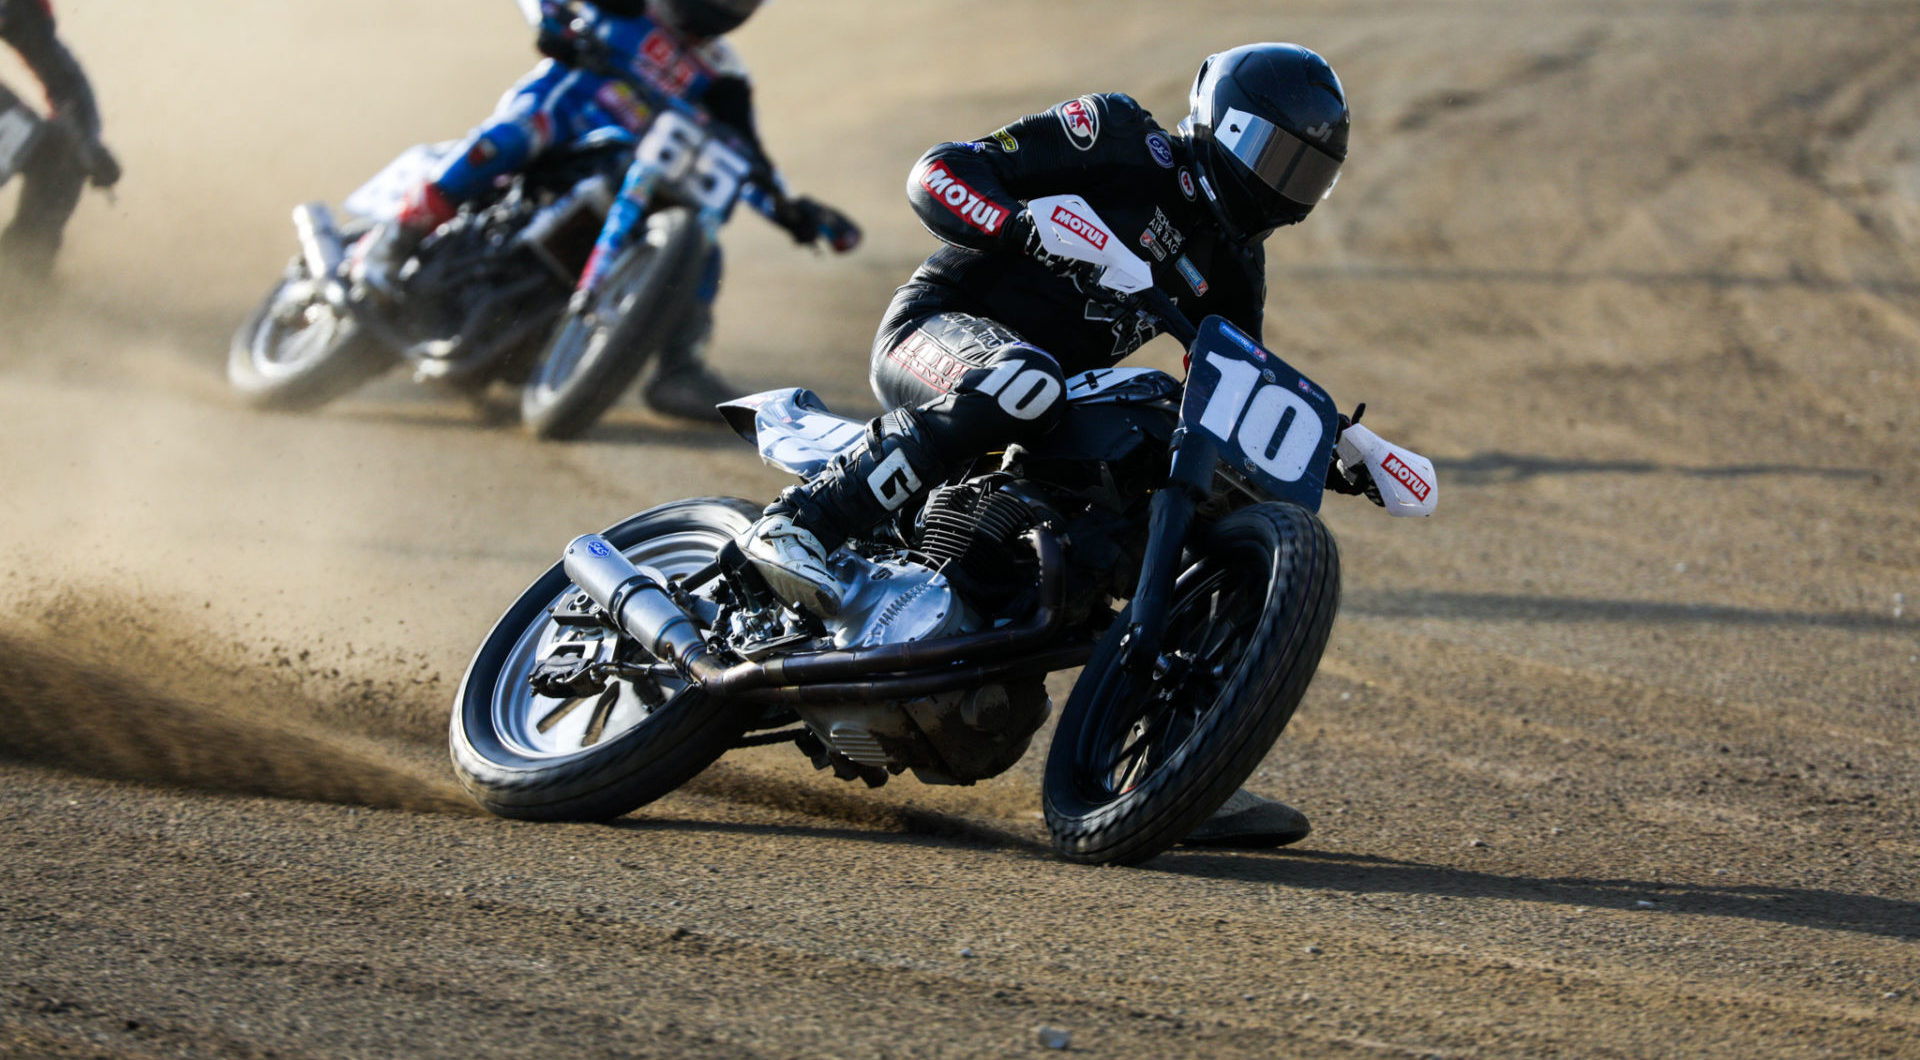 Johnny Lewis (10) in action on his Royal Enfield at the Lima Half-Mile. Photo by Scott Hunter, courtesy AFT.